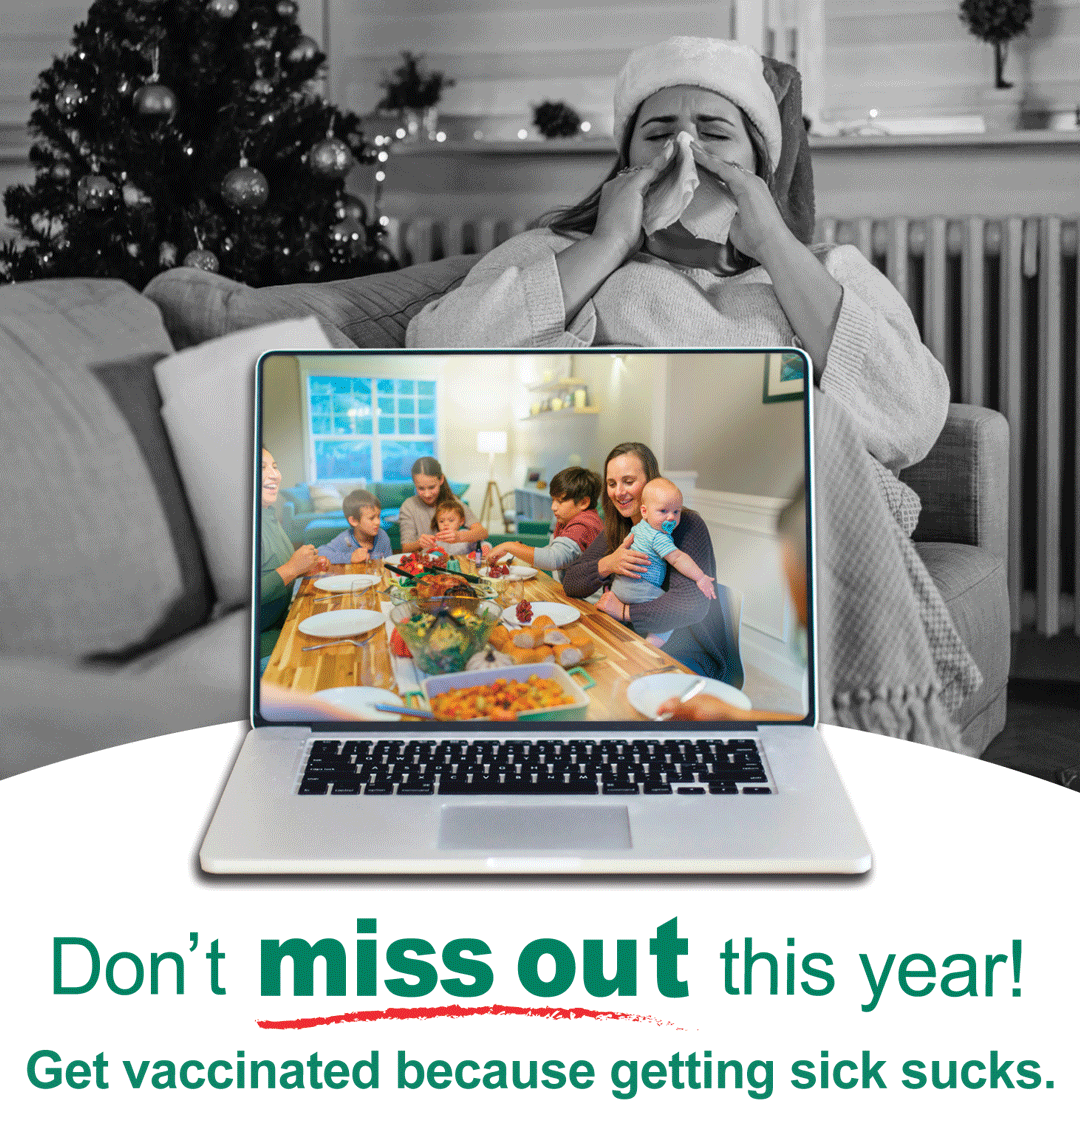 Get vaccinated because getting sick sucks. Find a clinic.